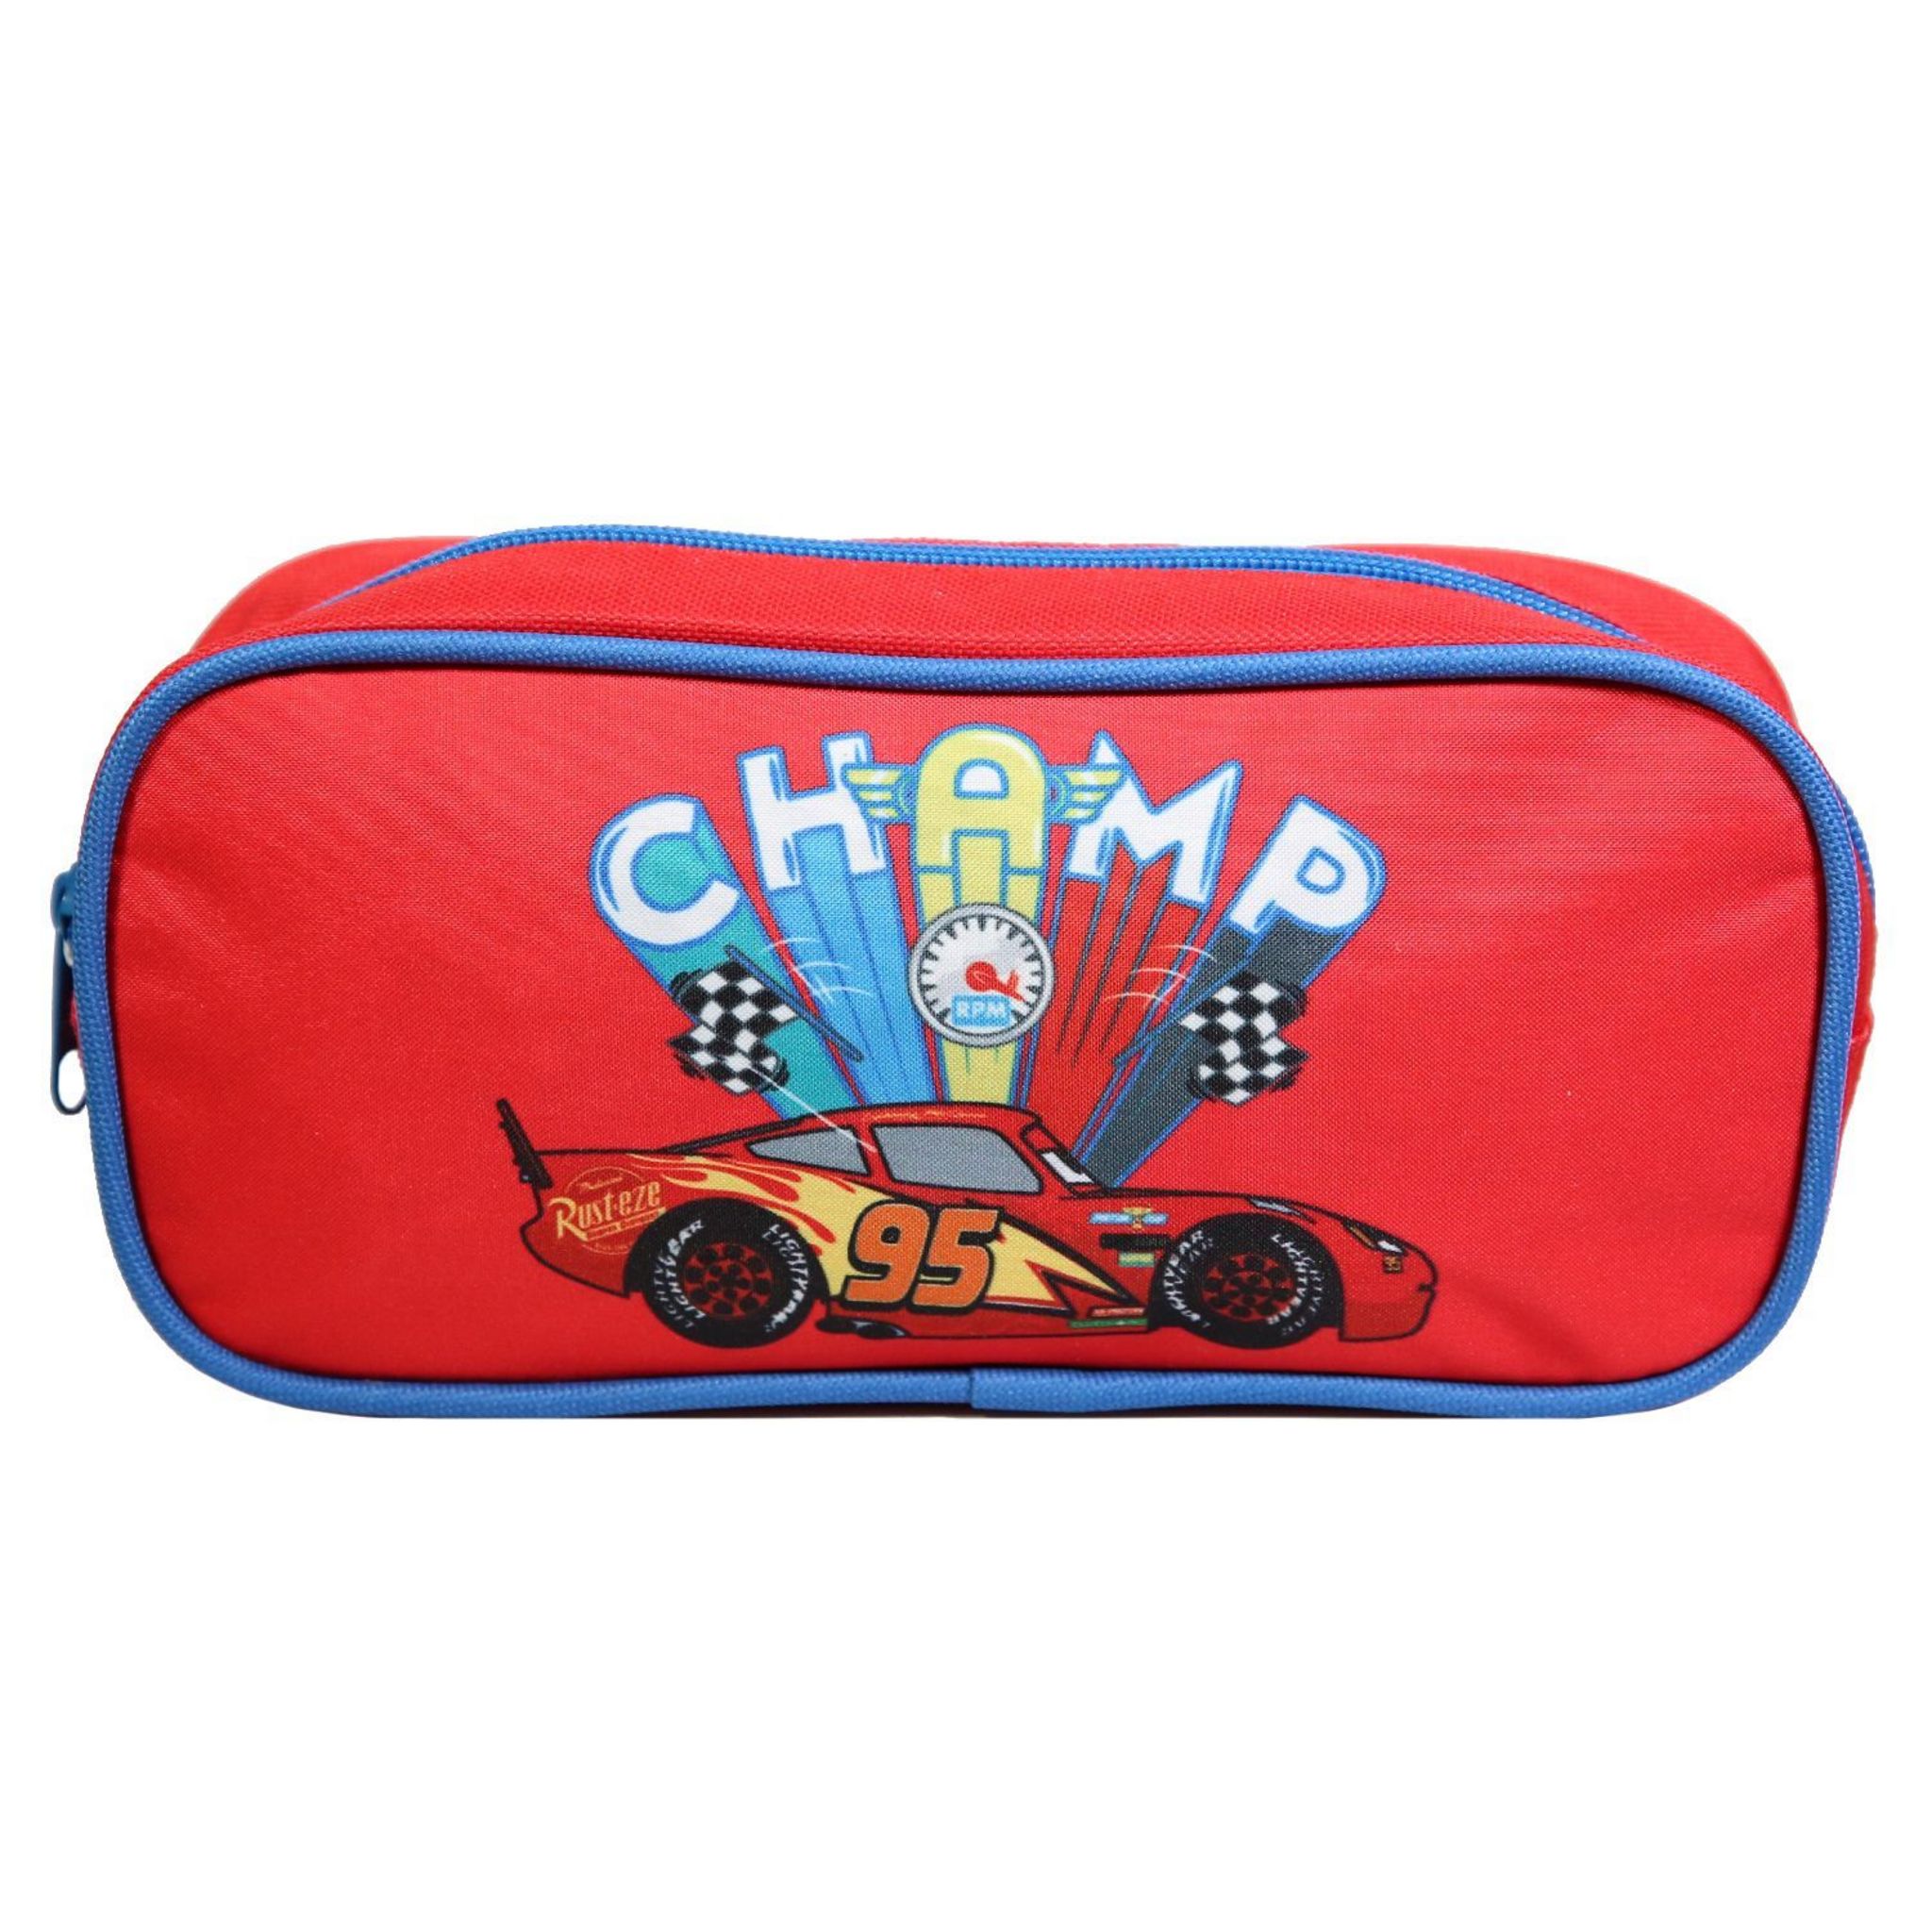 BAGTROTTER Trousse scolaire ronde Nasa Rouge - Rouge - Kiabi - 9.95€